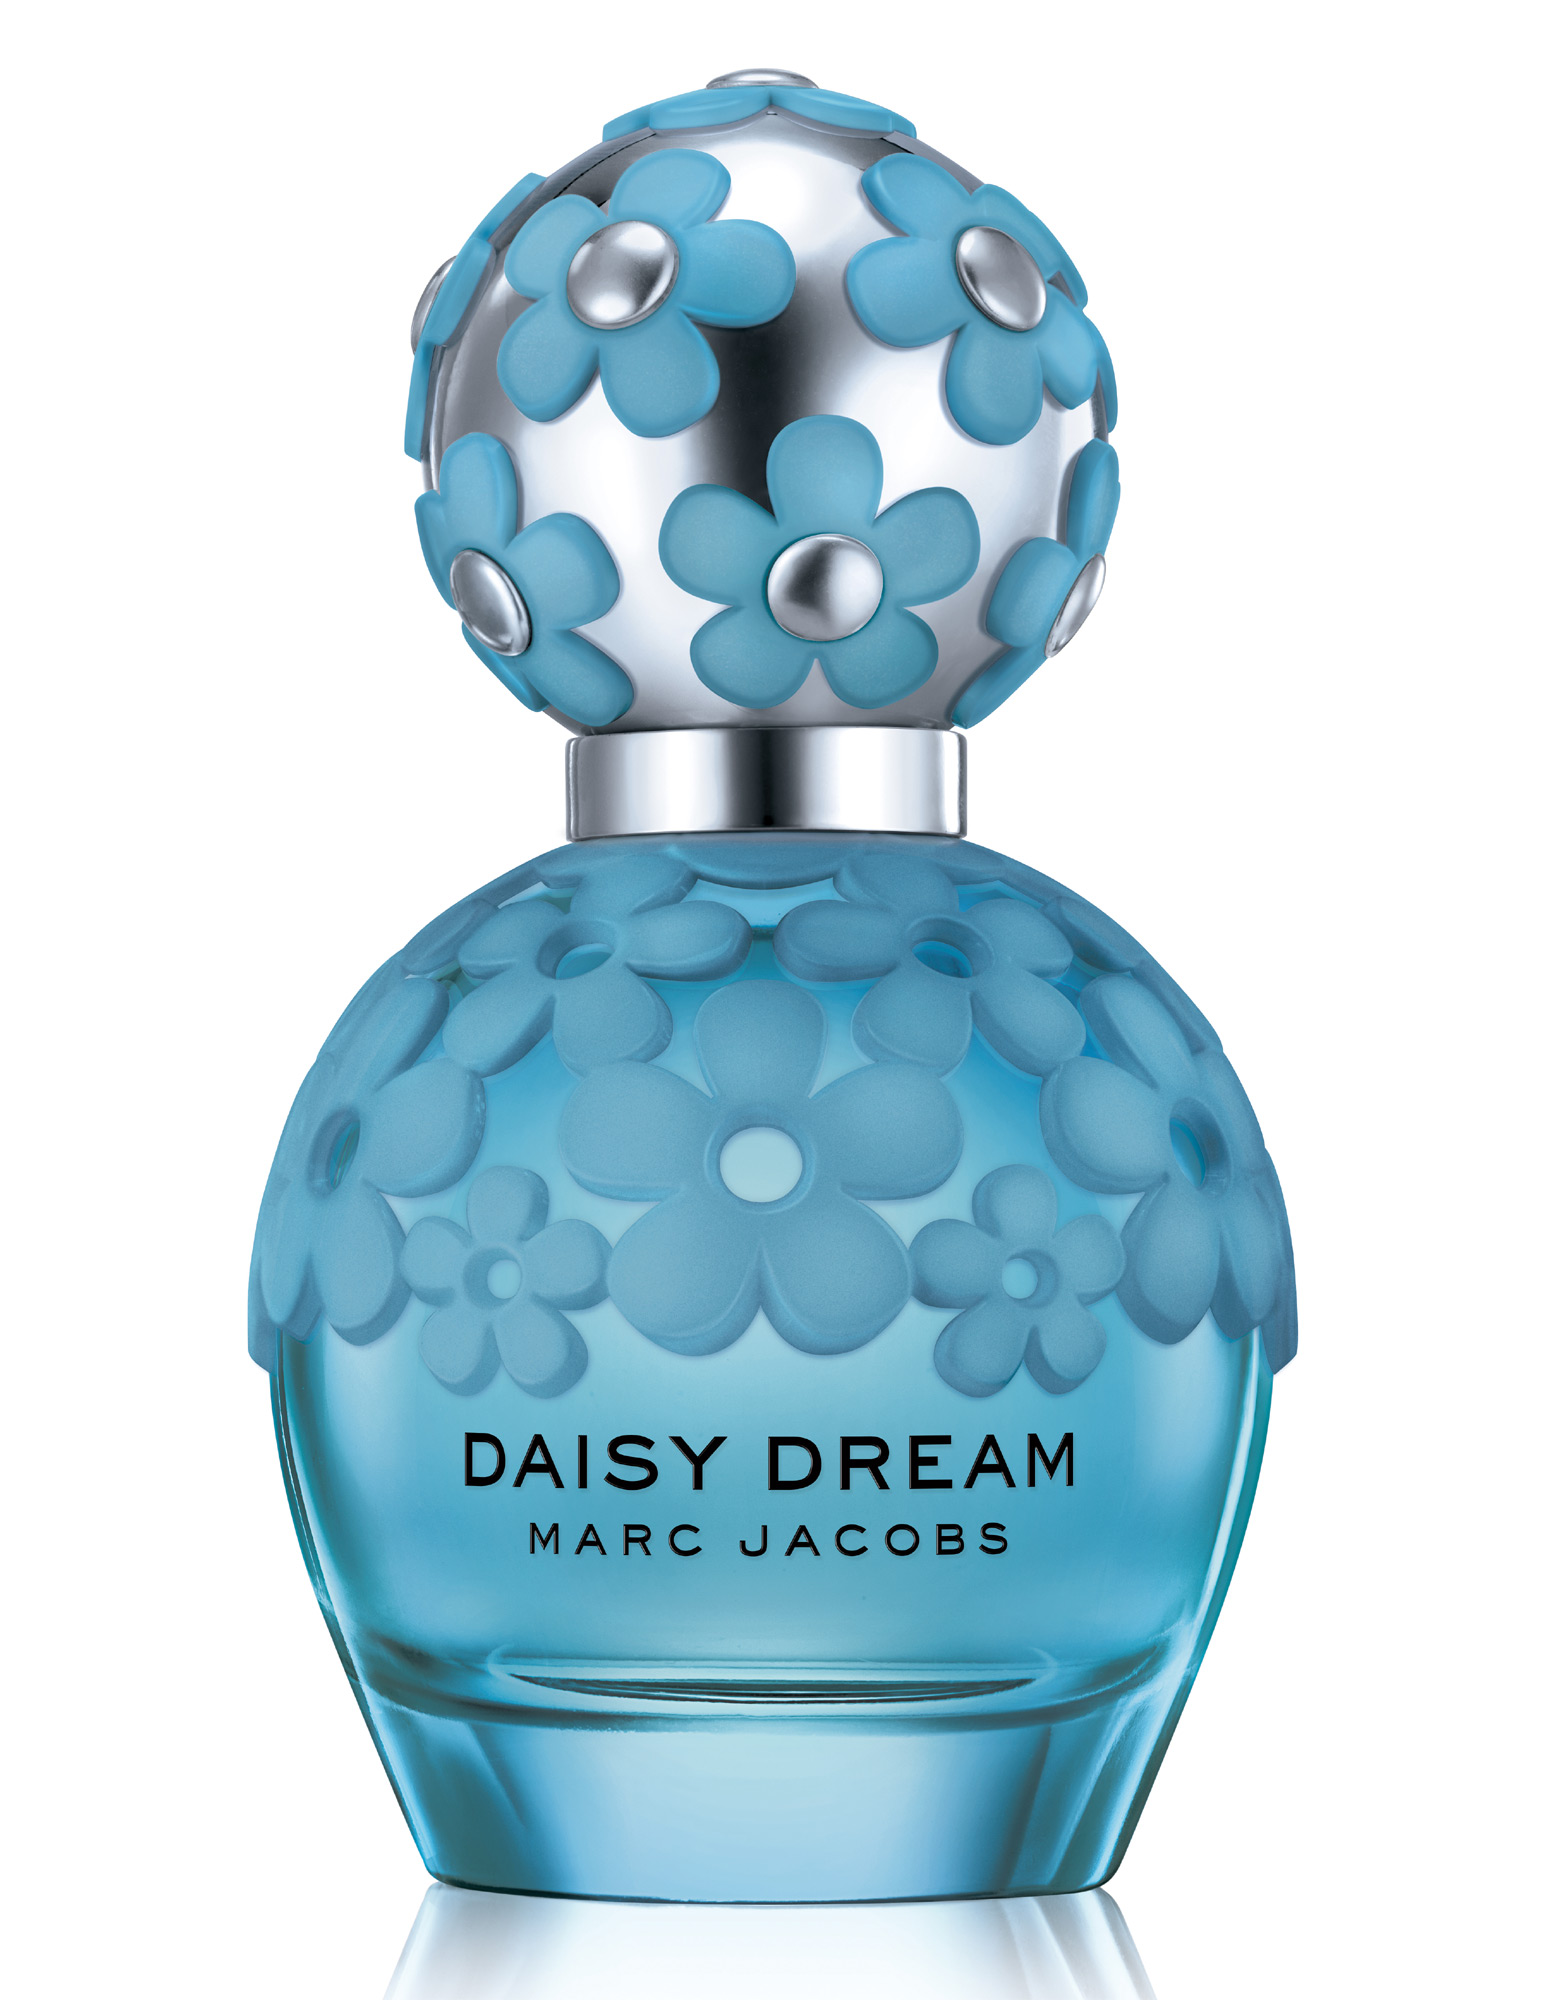 Daisy Dream Forever Marc Jacobs Perfume Una Fragancia Para Mujeres My